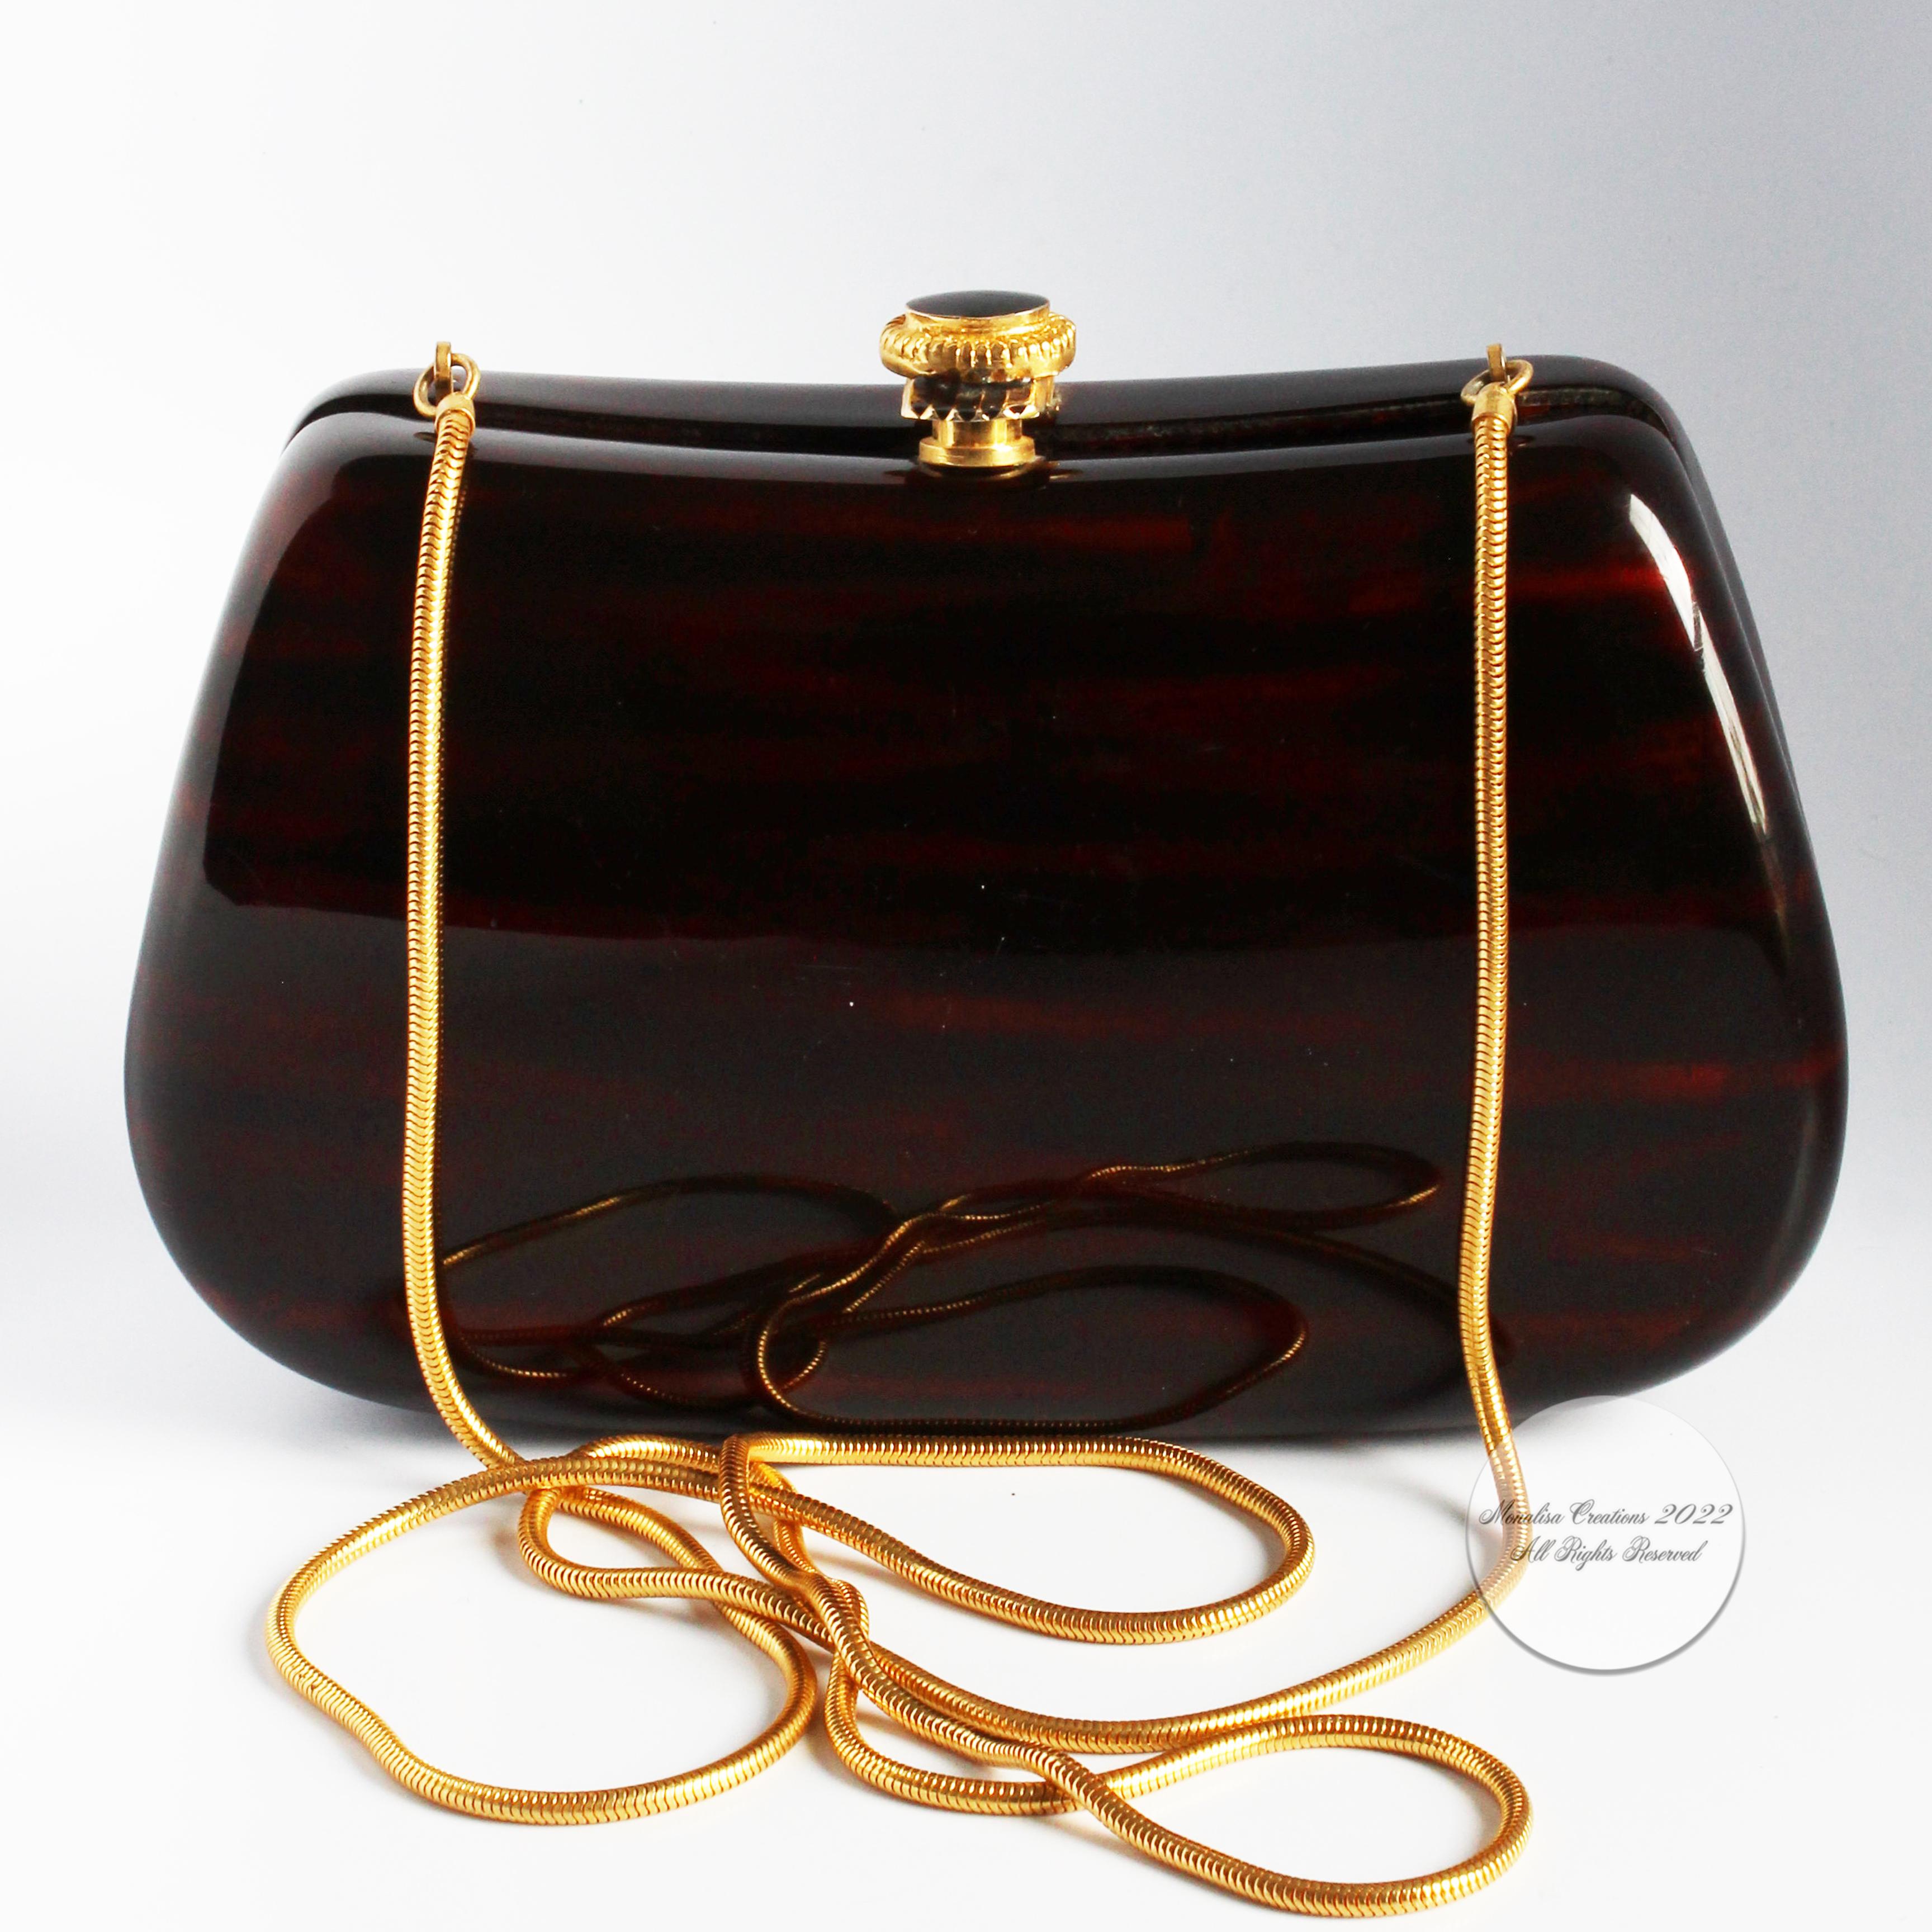 Saks Fifth Avenue Evening Bag Minaudière Polished Wood Resin Italy Rare Vintage In Good Condition For Sale In Port Saint Lucie, FL